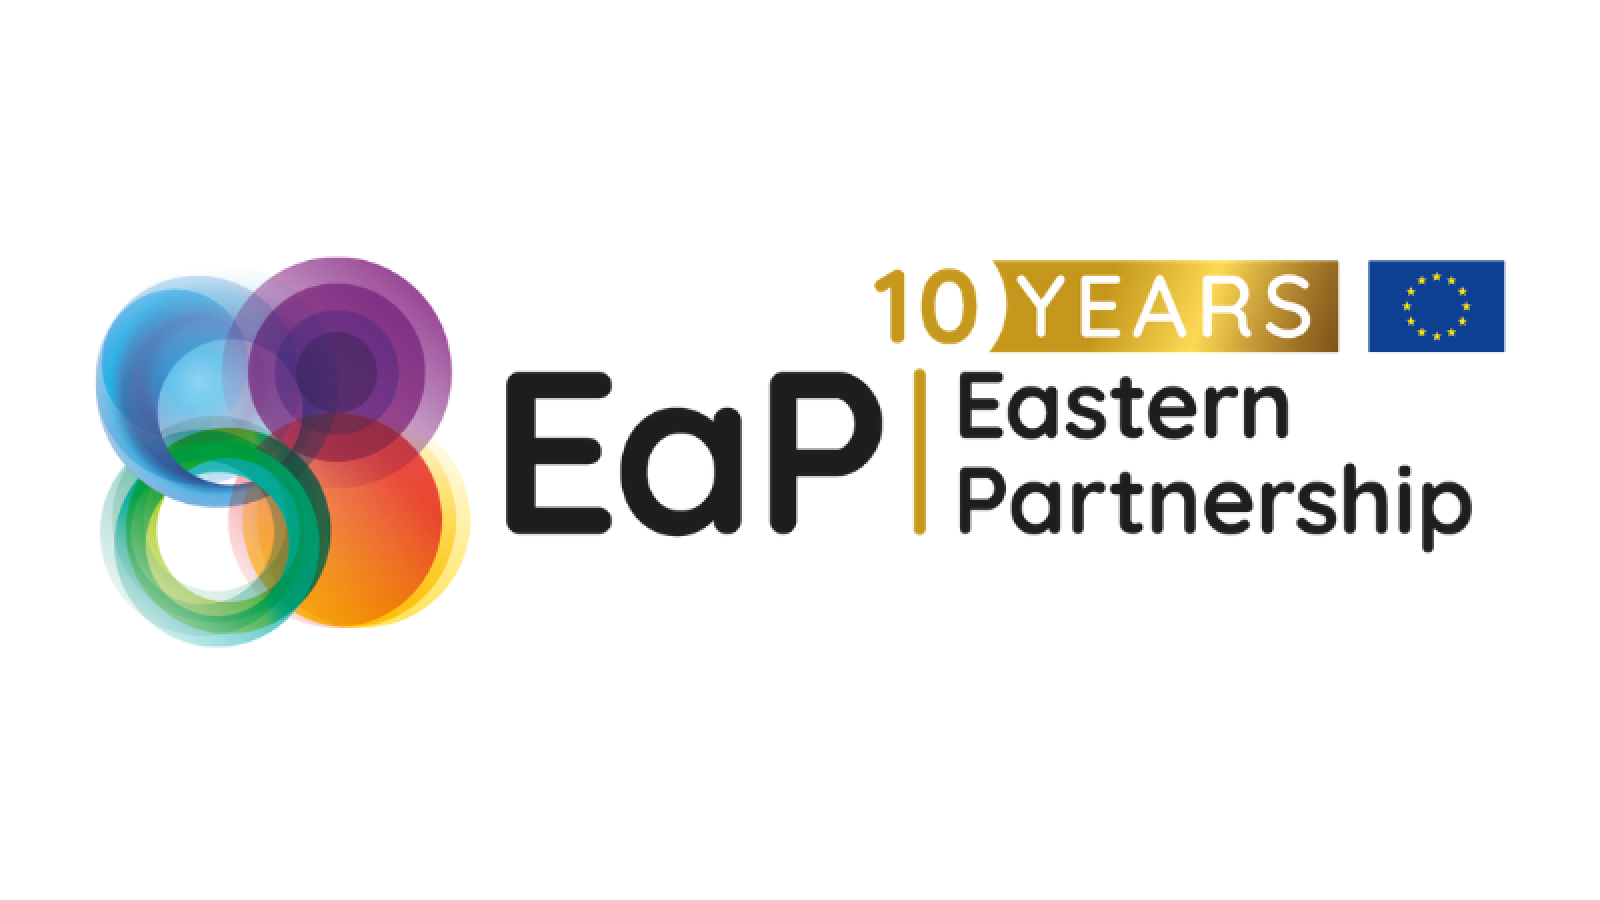 Eastern Partnership celebrates its 10th anniversary in 2019